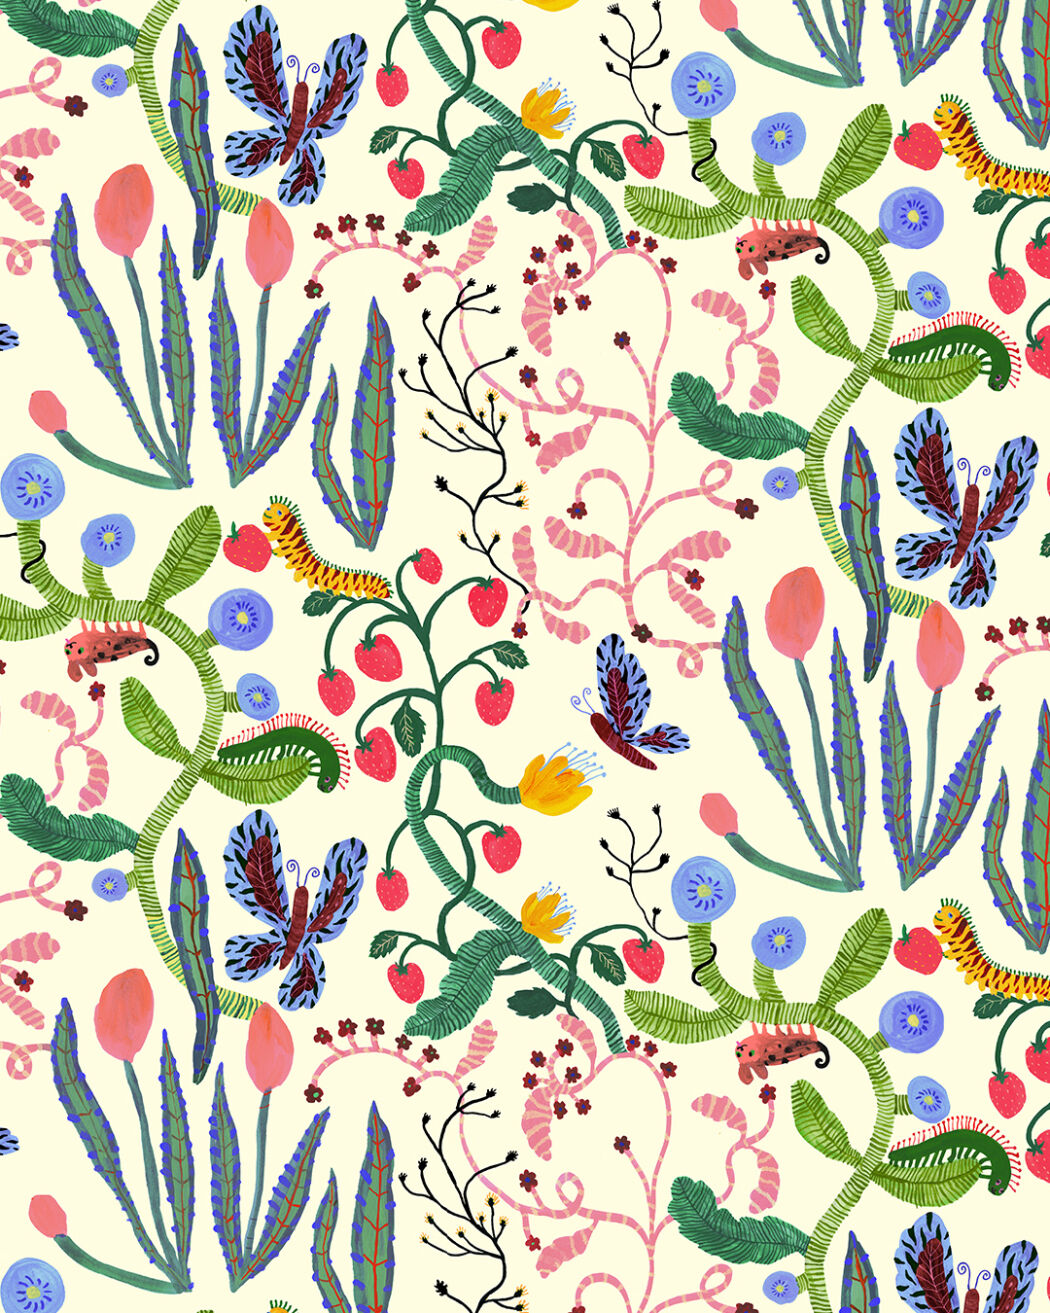 Botanical illustrated pattern and print design by Yoyo Nasty